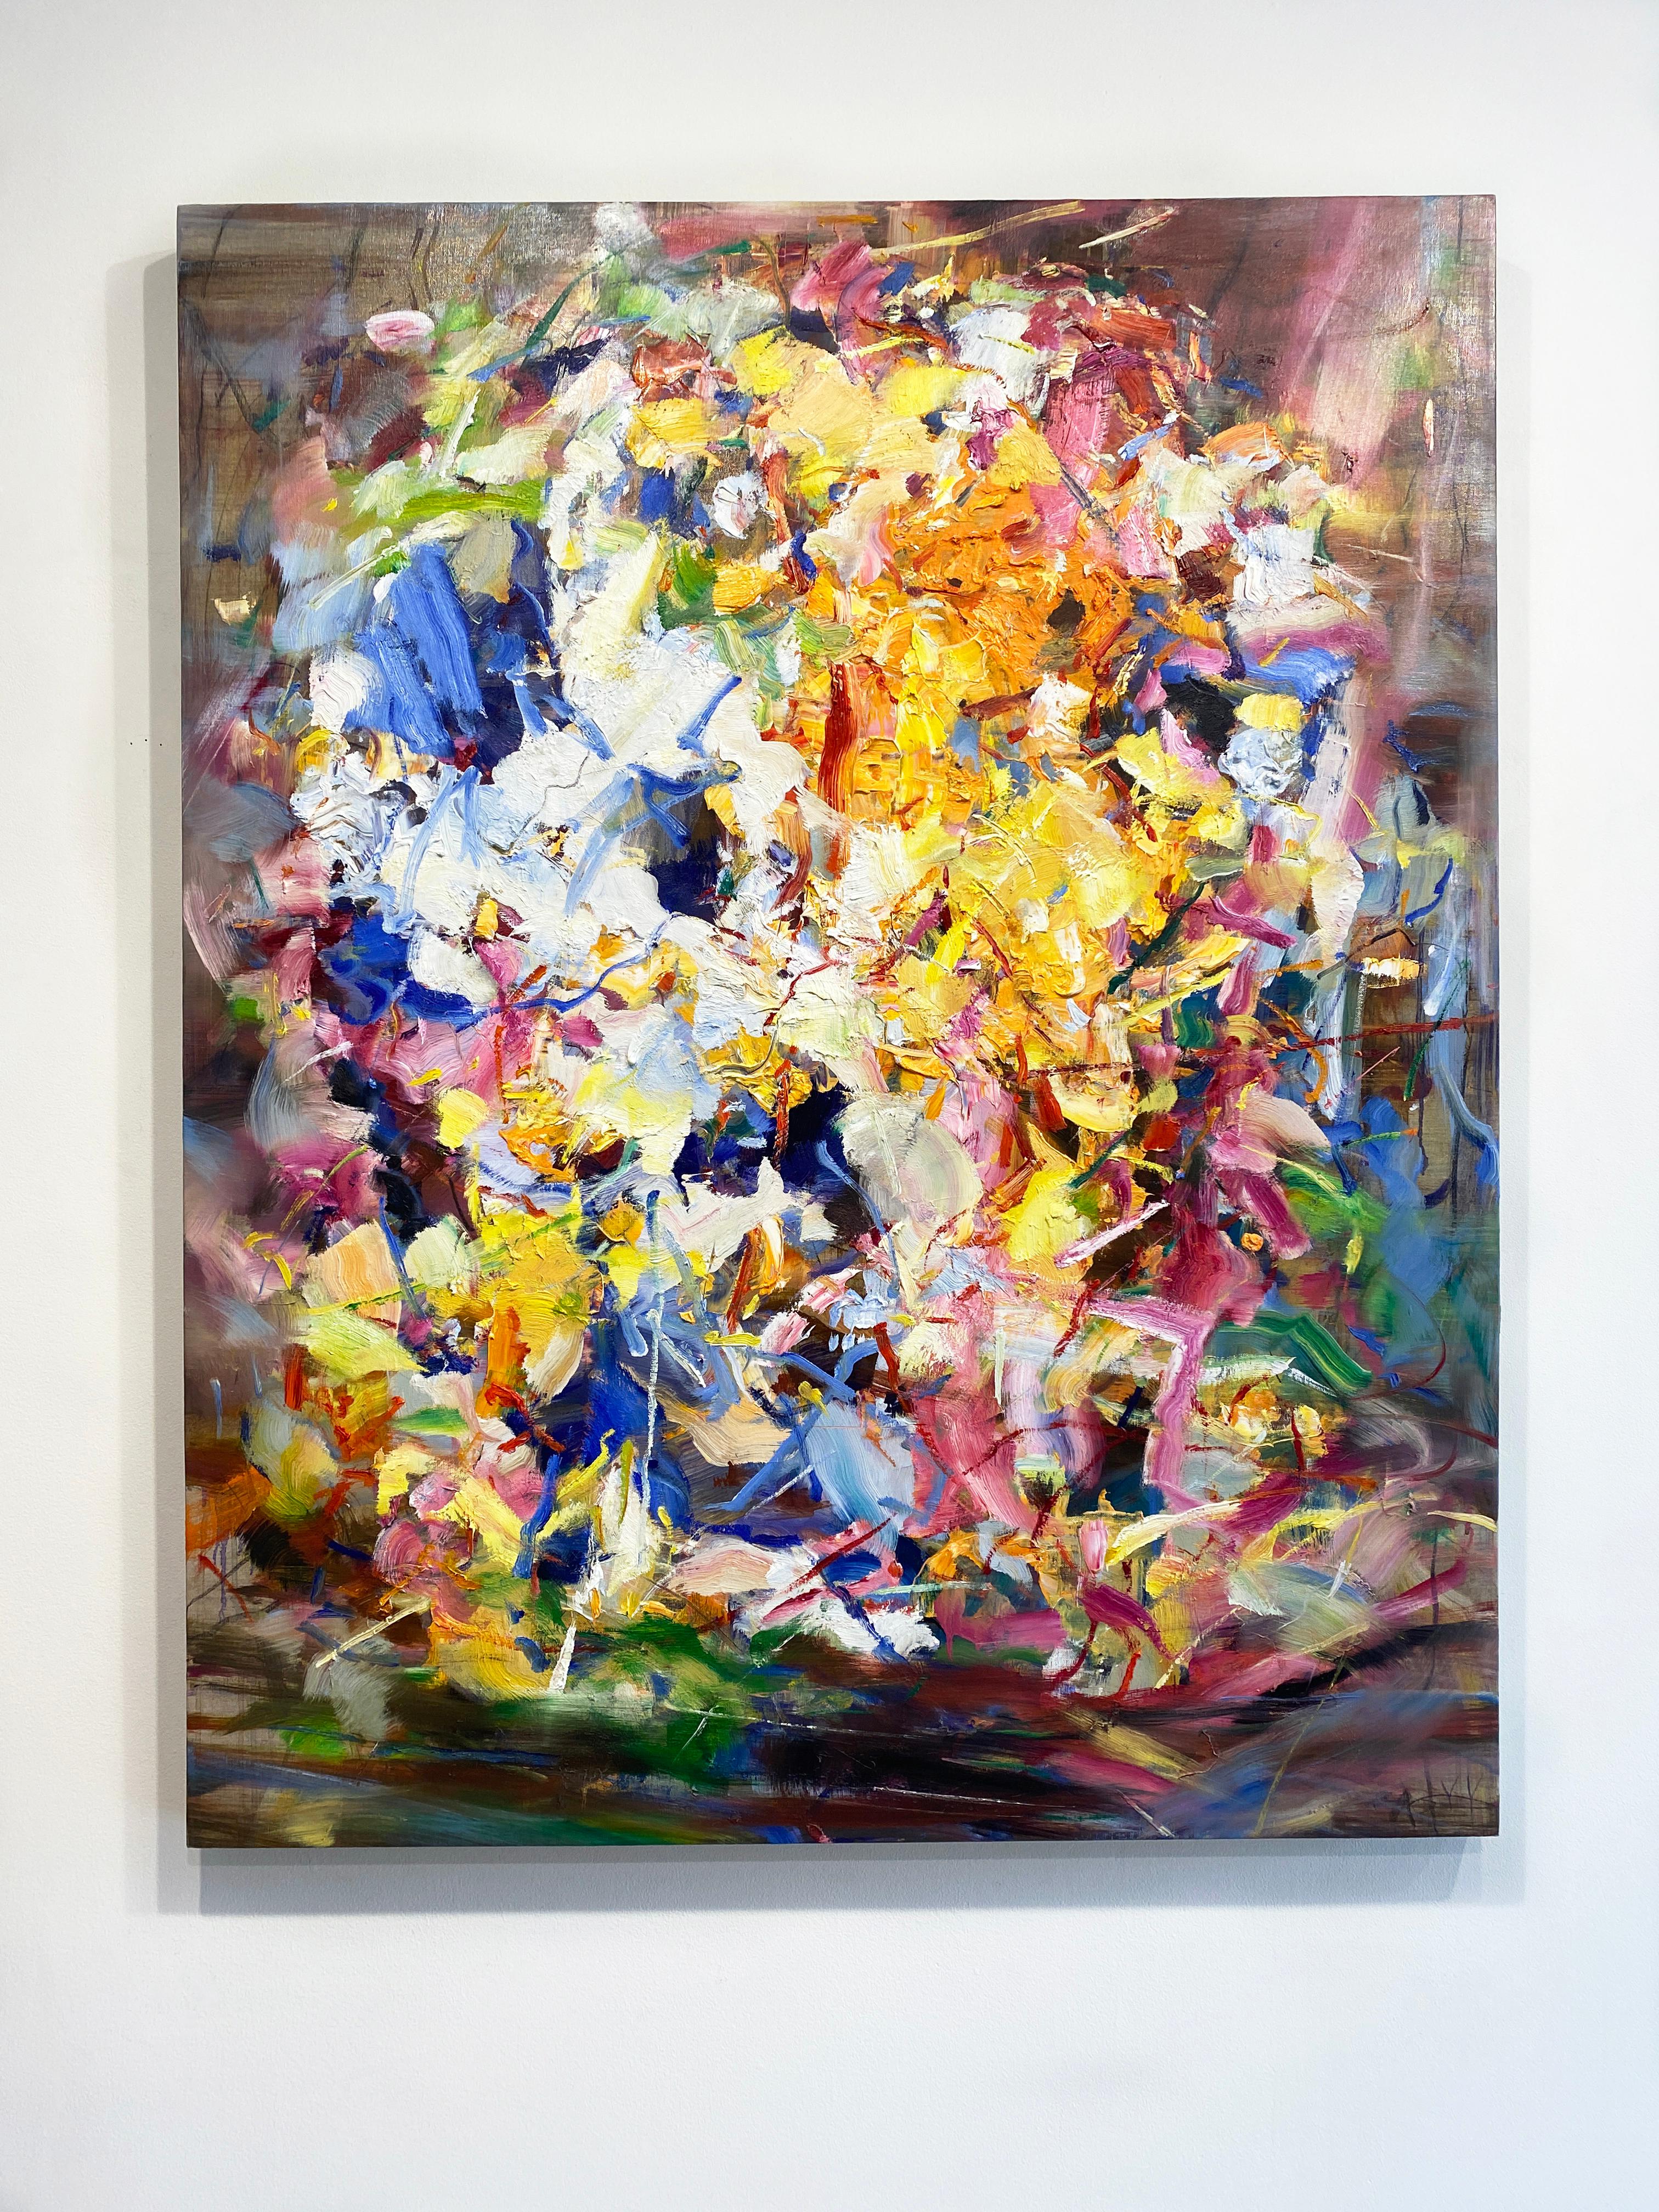 'Awake' 2021 by Chinese/Canadian artist Yangyang Pan. Oil on linen, 50 x 40 in. This beautiful abstract-expressionistic, landscape painting incorporates gestural brushstrokes resembling a floral garden in bold colors of yellow, orange, pink, green,